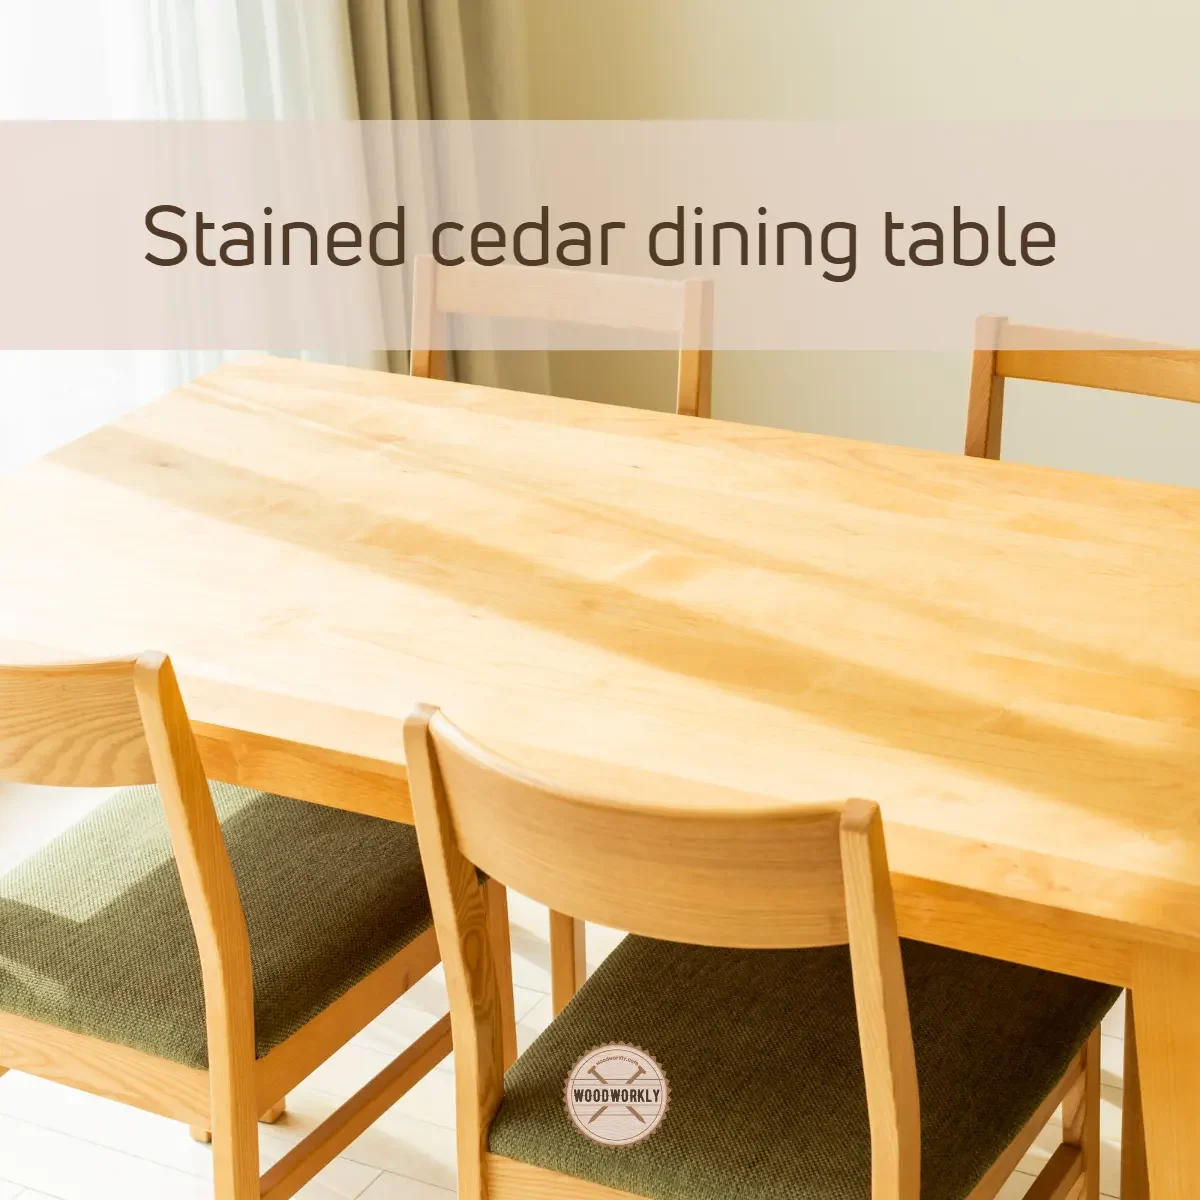 Stained cedar dining table